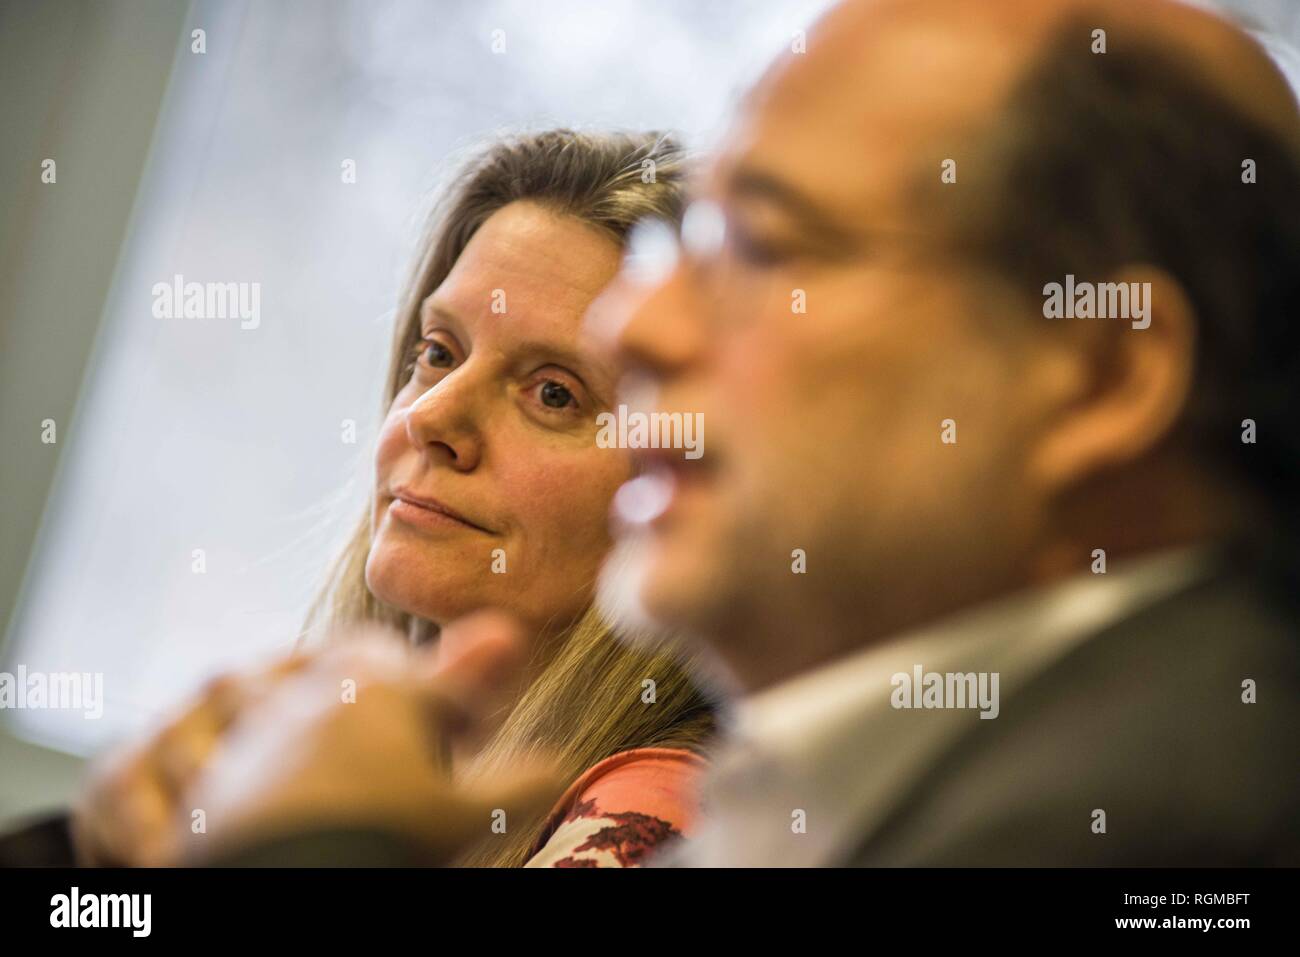 Munich, Bavaria, Germany. 30th Jan, 2019. HENRIKE HAHN, Spitzenkandidat from the Bavarian Greens for the European Parliament. The Bavarian Green Party presented Henrike Hahn, their European ParliamentSpitzenkandidat for the upcoming European elections (Europawahl). Hahn is a trained technologist and has lived previously in Detroit and Paris. Her strategies are based on ecological and social criteria and fighting against populism and right extremism. The Greens see the European Union as the greatest peace project of our time, thus they have positioned themselves against authoritarianism, Stock Photo